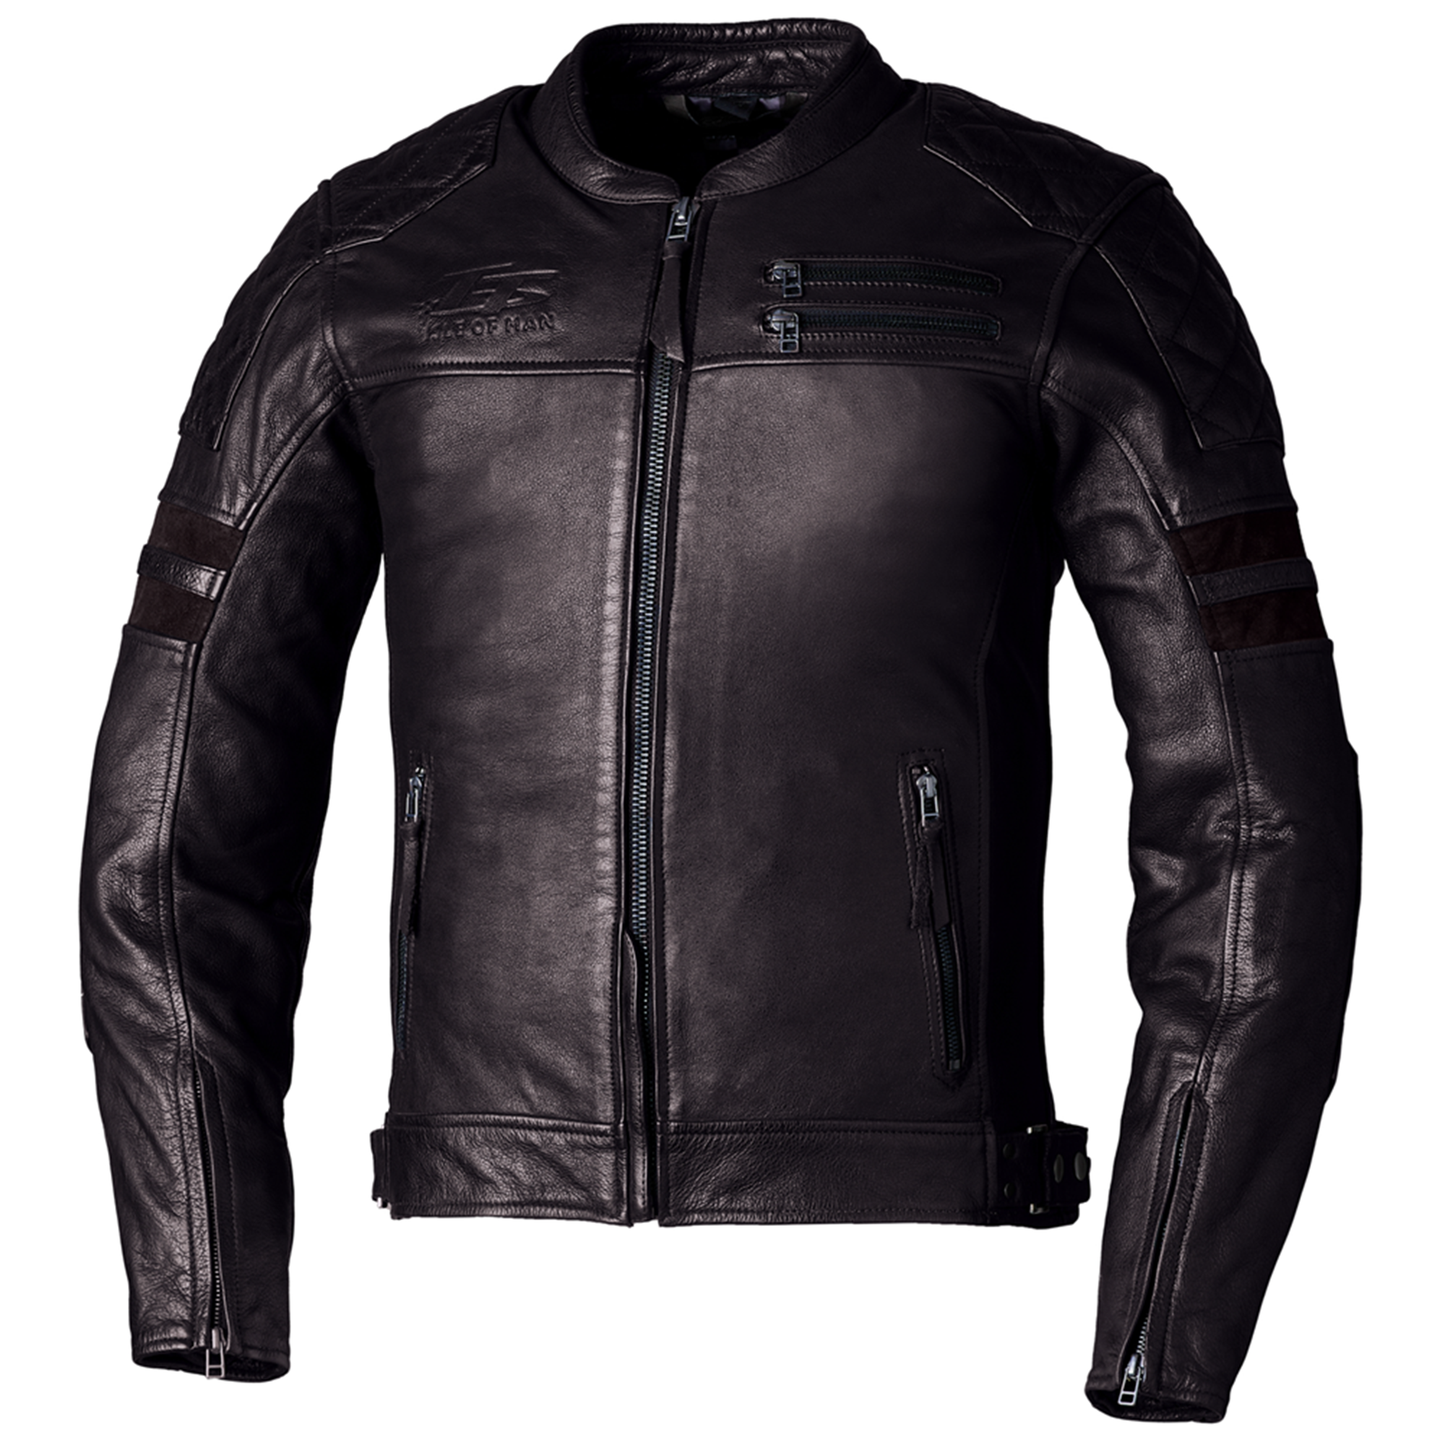 RST IOM TT Hillberry 2 (CE) Leather Jacket - Brown